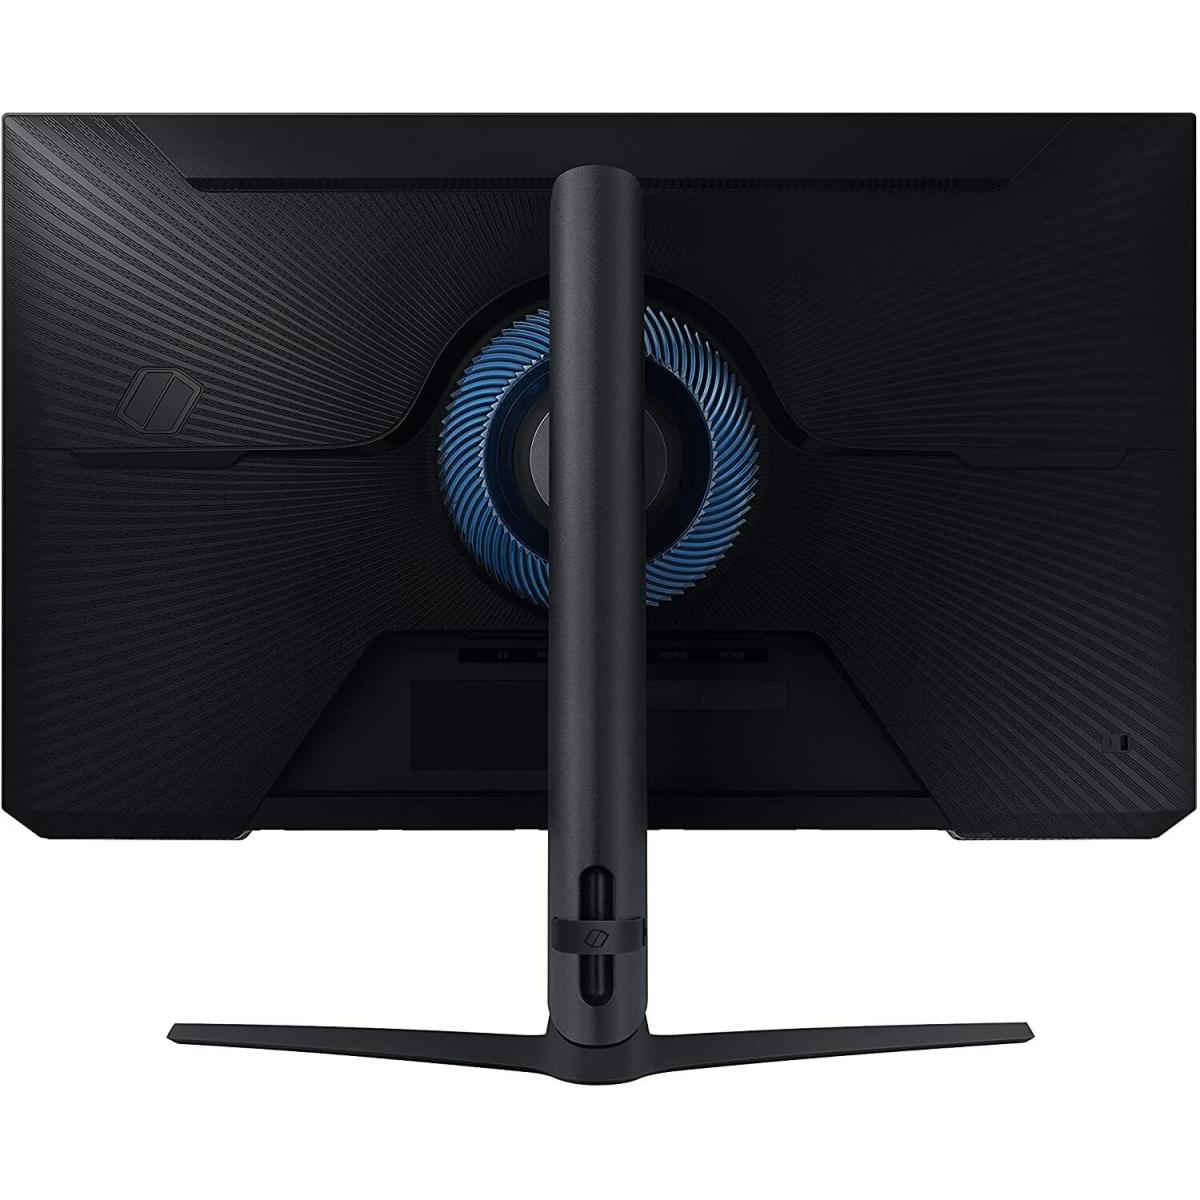 Samsung 27"/32" Gaming Monitor with IPS panel, 165hz refresh rate and 1ms response time